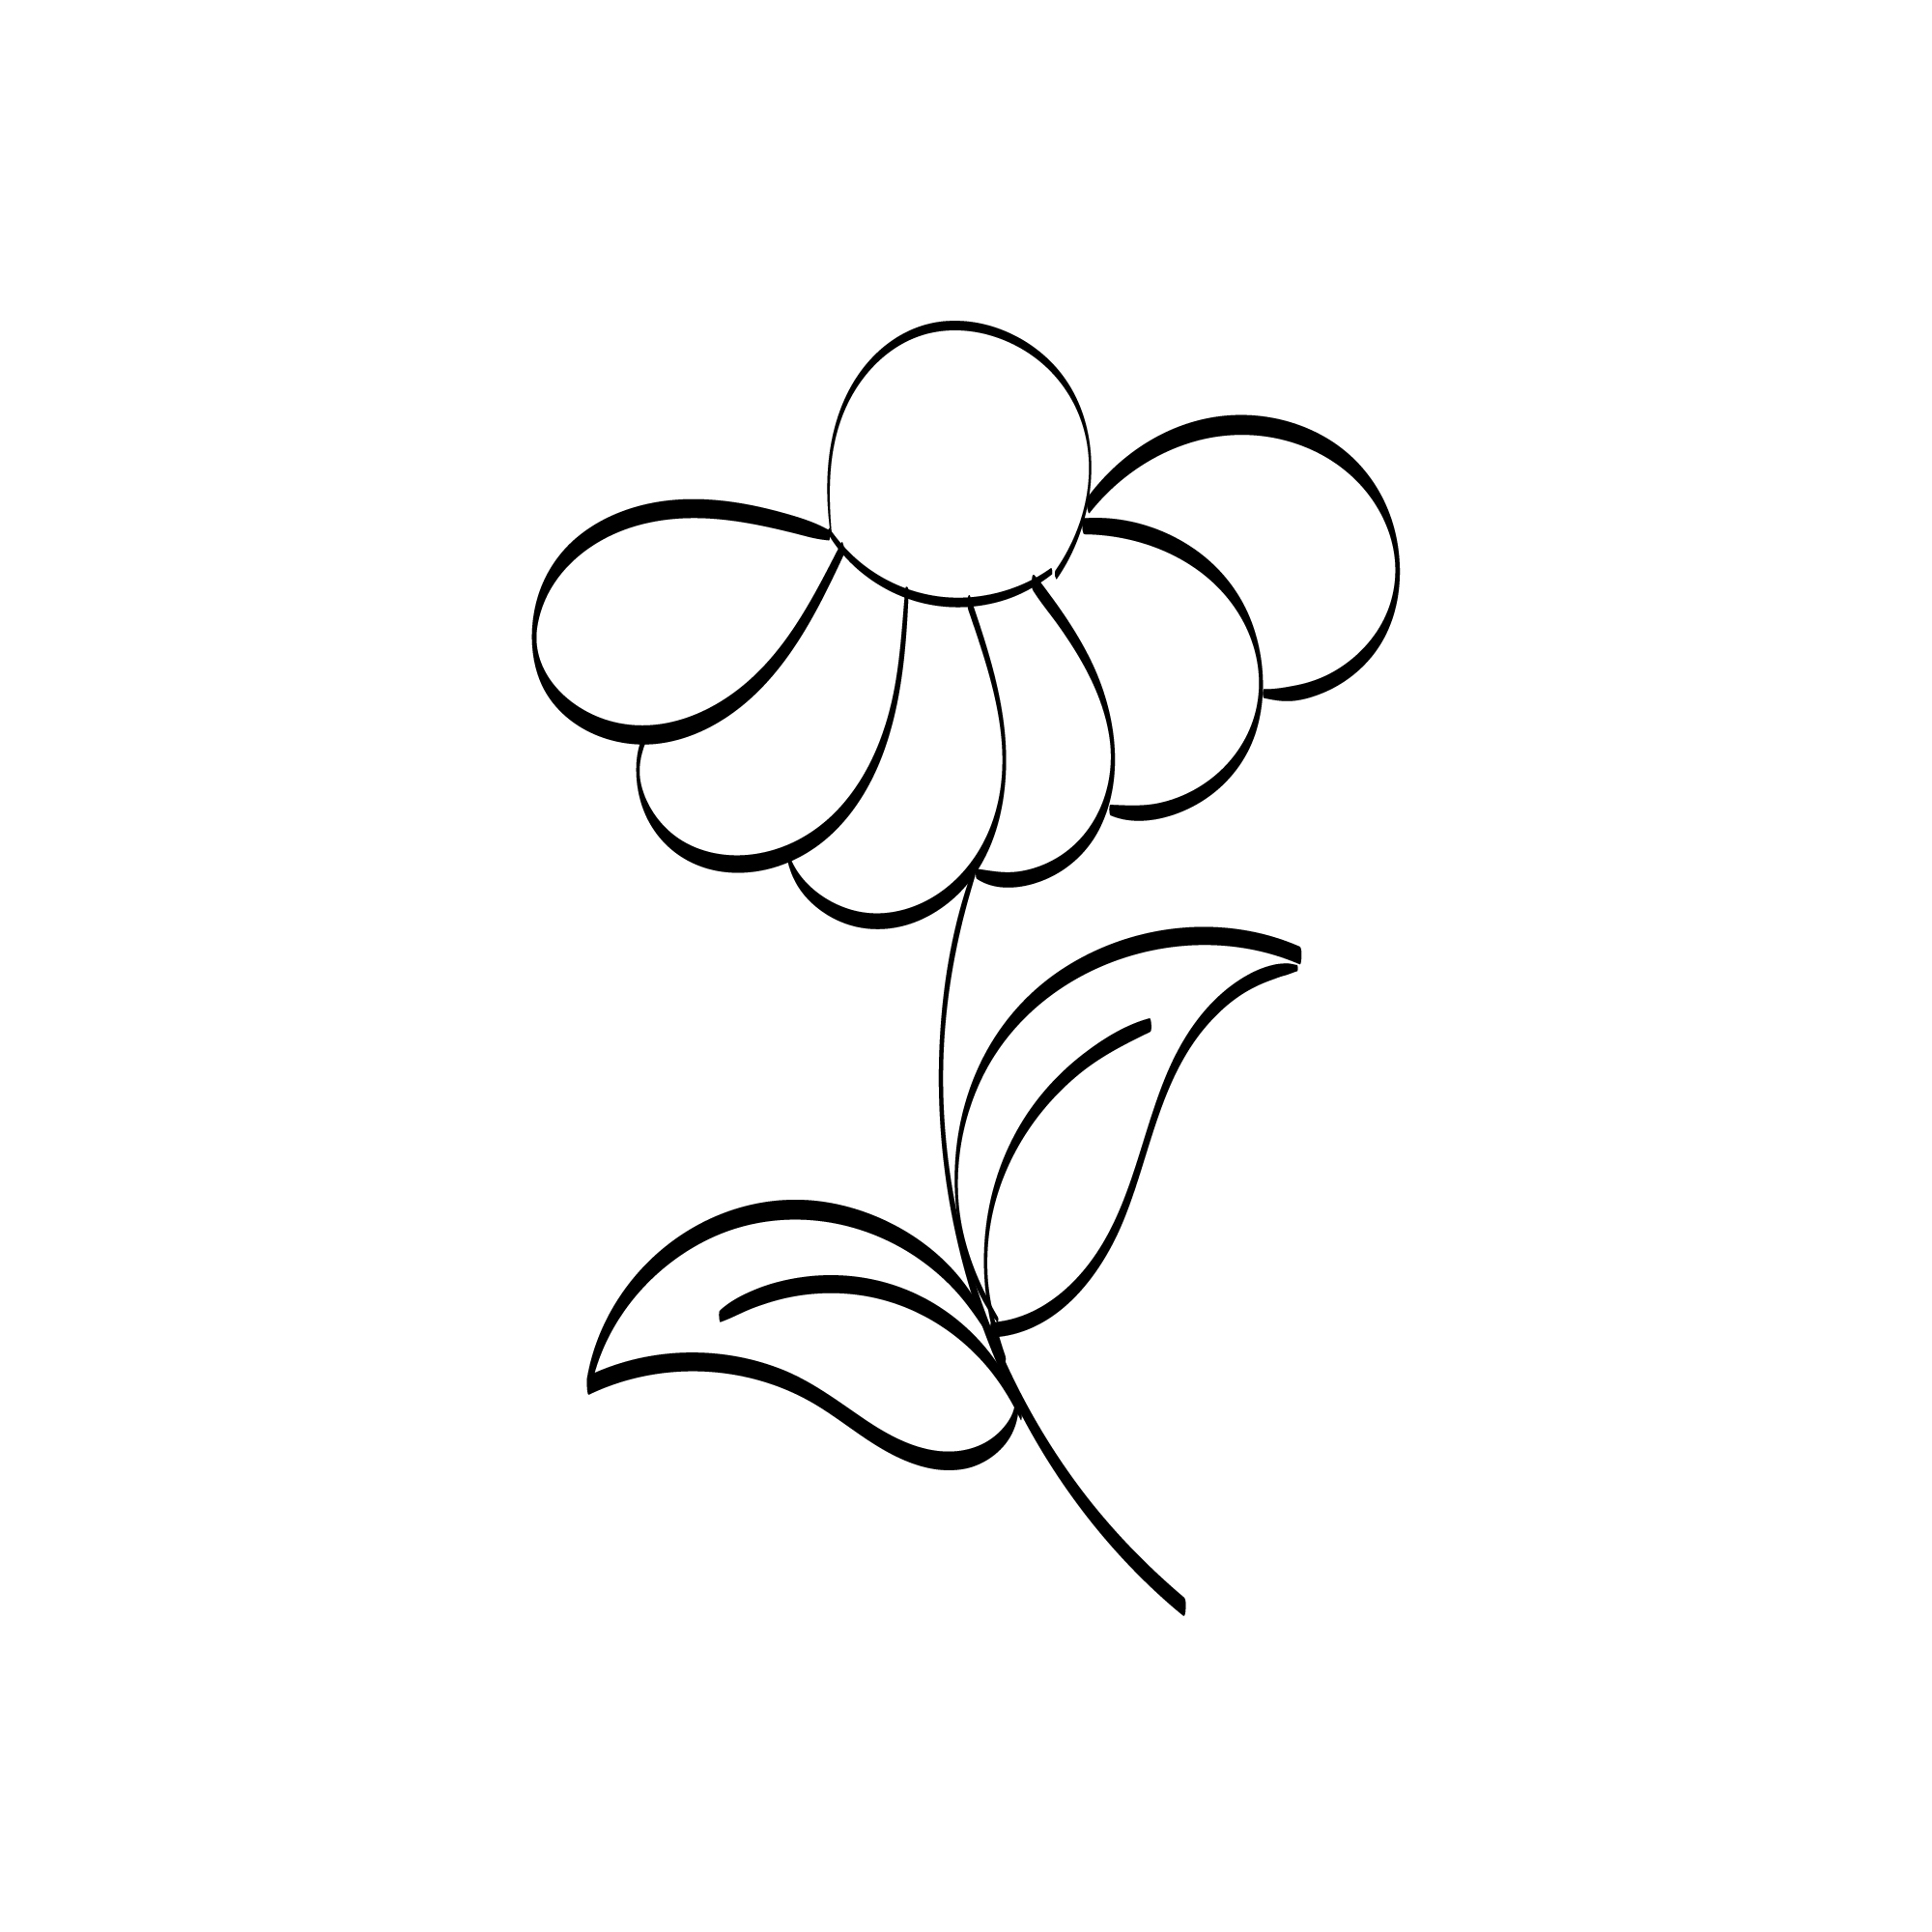 Nice Floral Art Drawing with Line-art Facebook image.